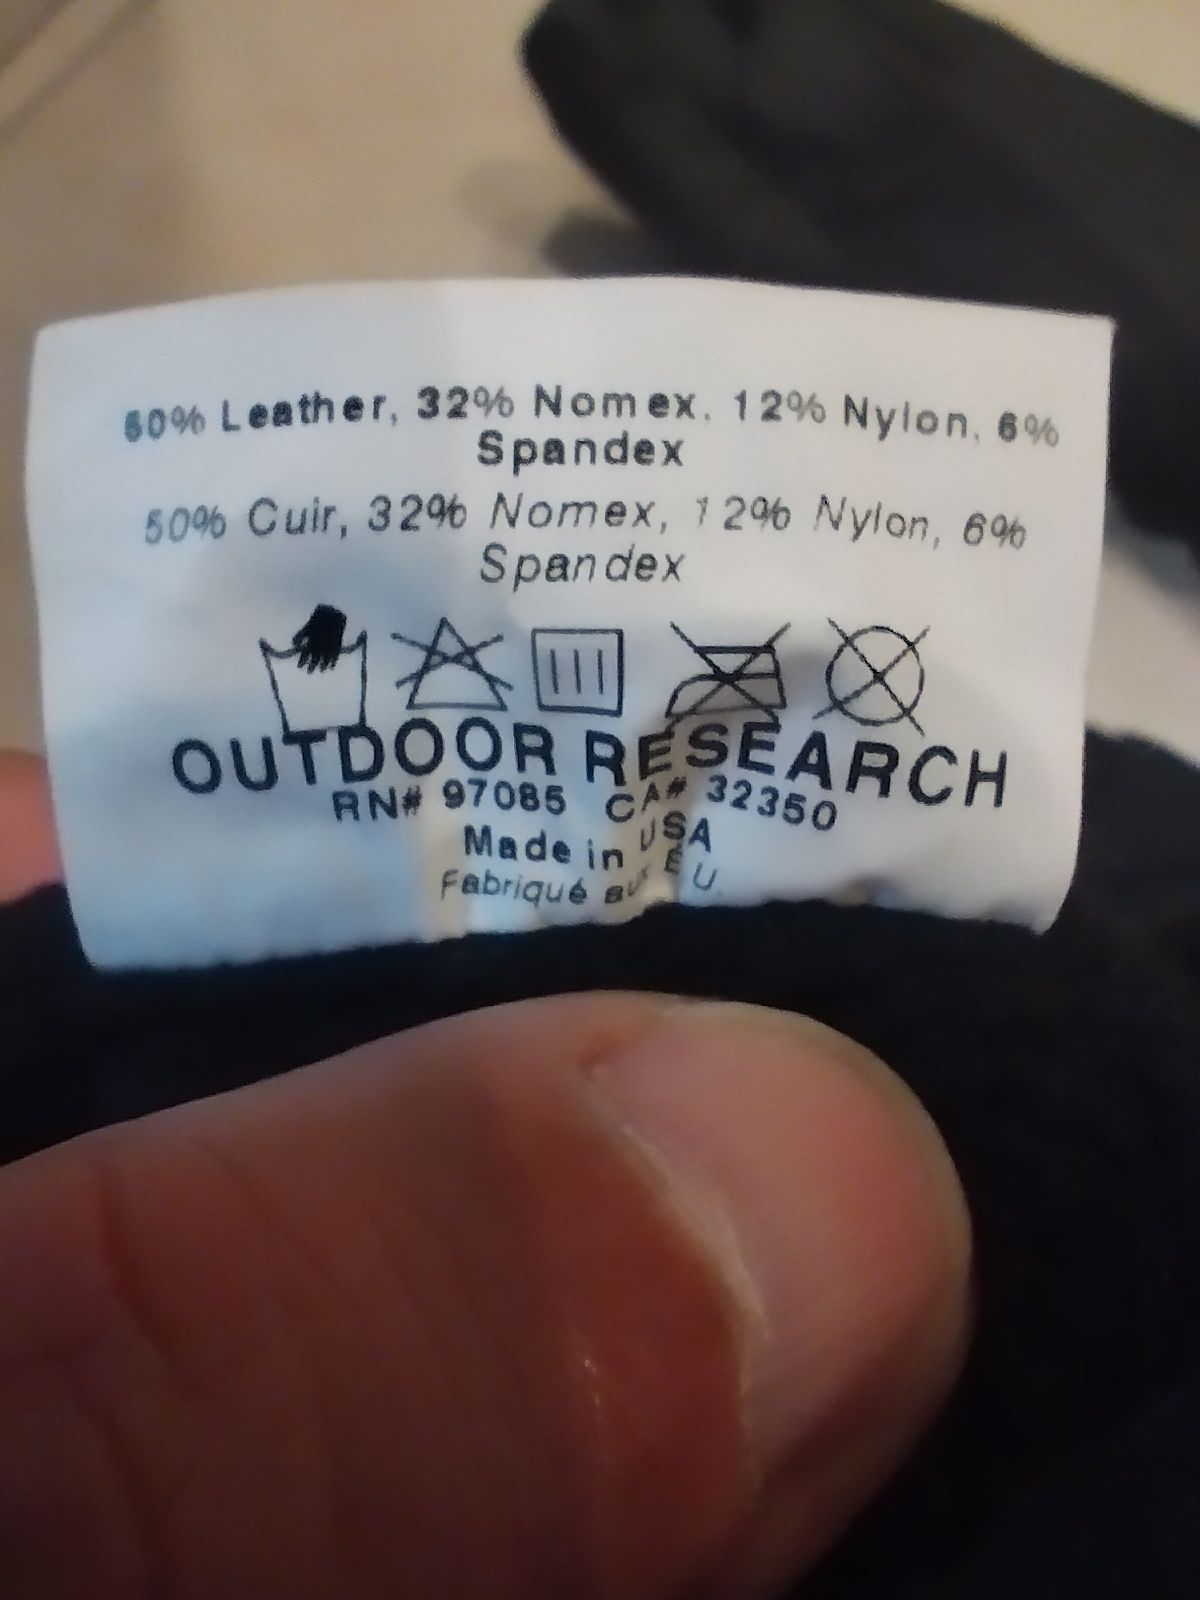 Рукавички Outdoor Research Carson (Gore-Tex) with Rucker Fleece liner